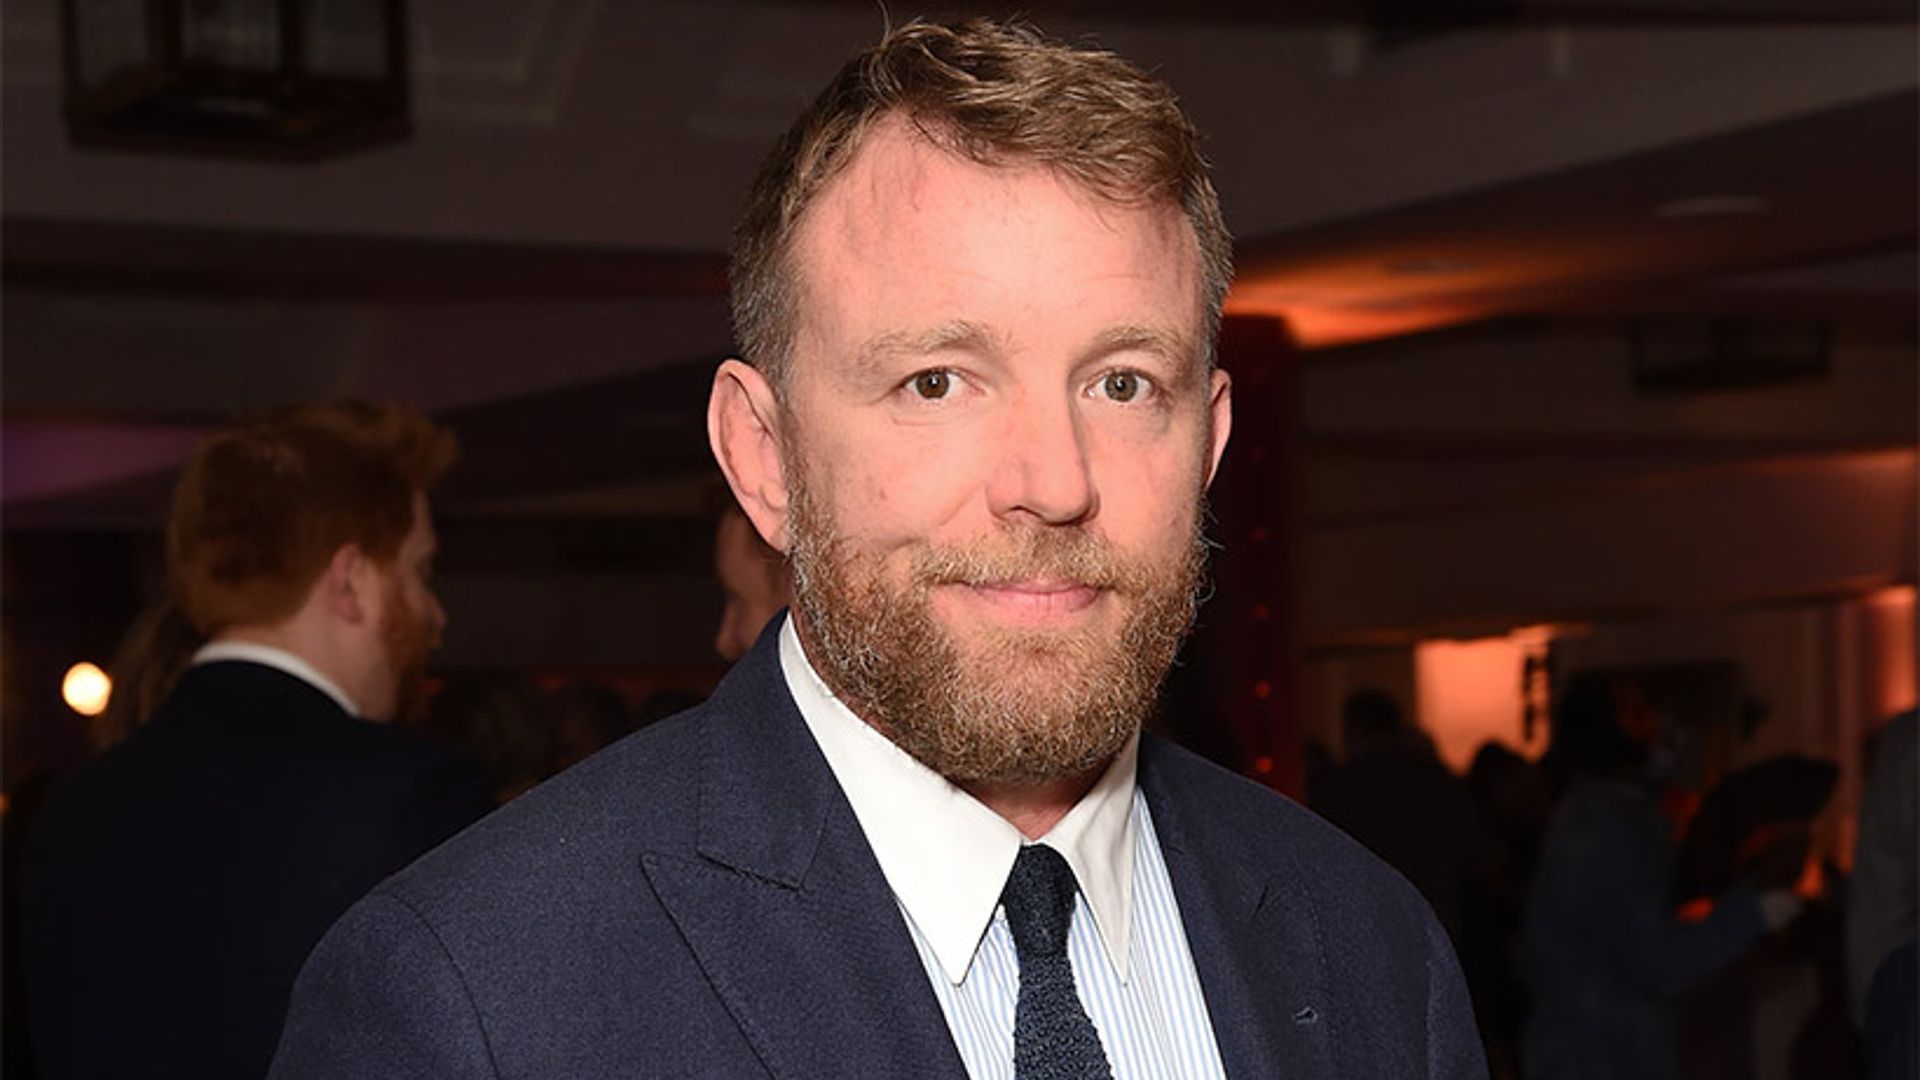 You can now buy a beer made by Guy Ritchie